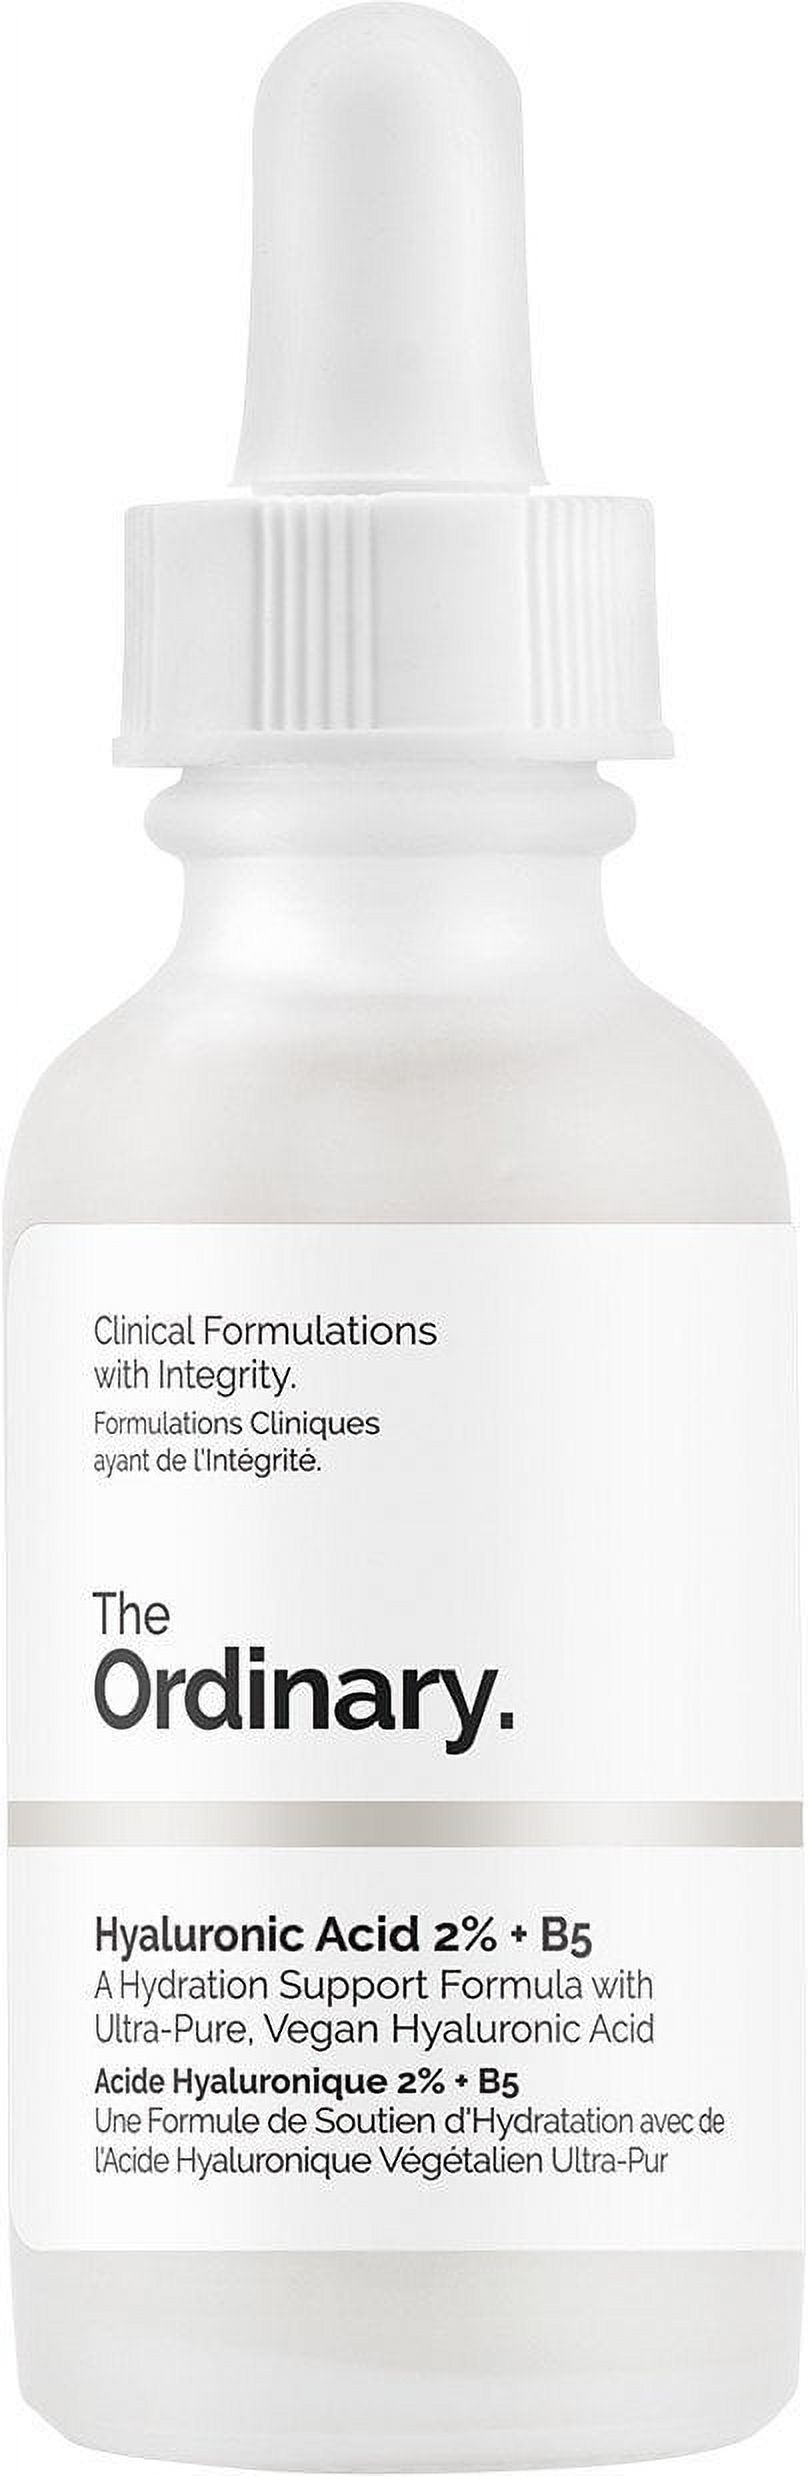 The Ordinary Hyaluronic Acid 2% + B5 30ml - image 1 of 4